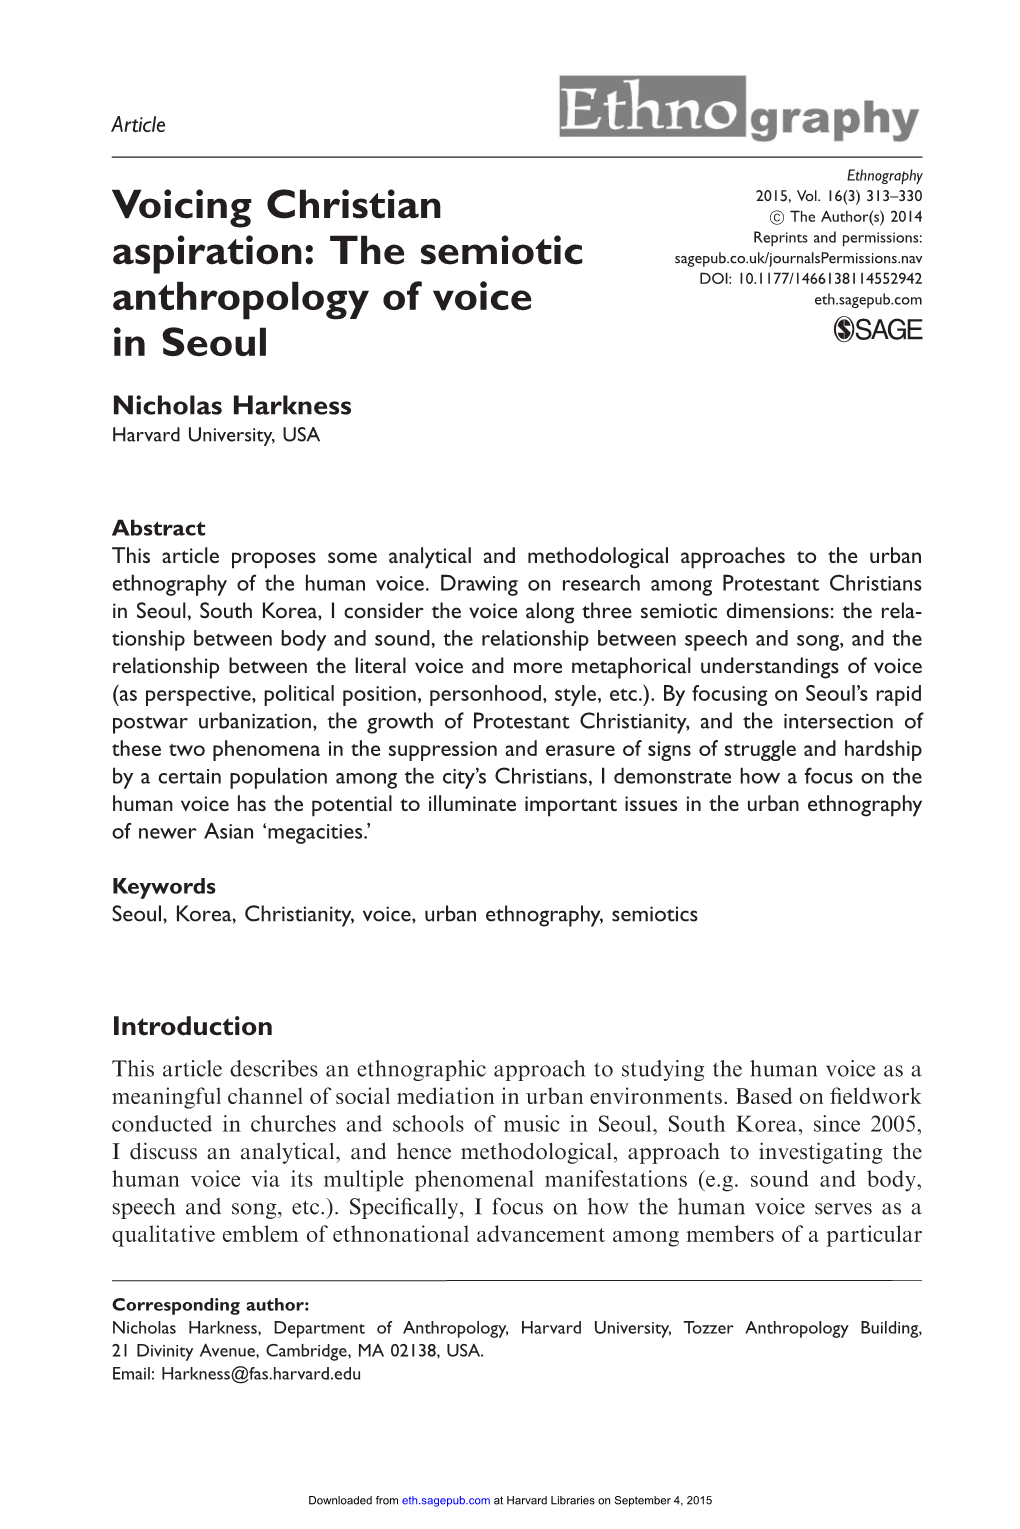 Voicing Christian Aspiration: the Semiotic Anthropology of Voice In